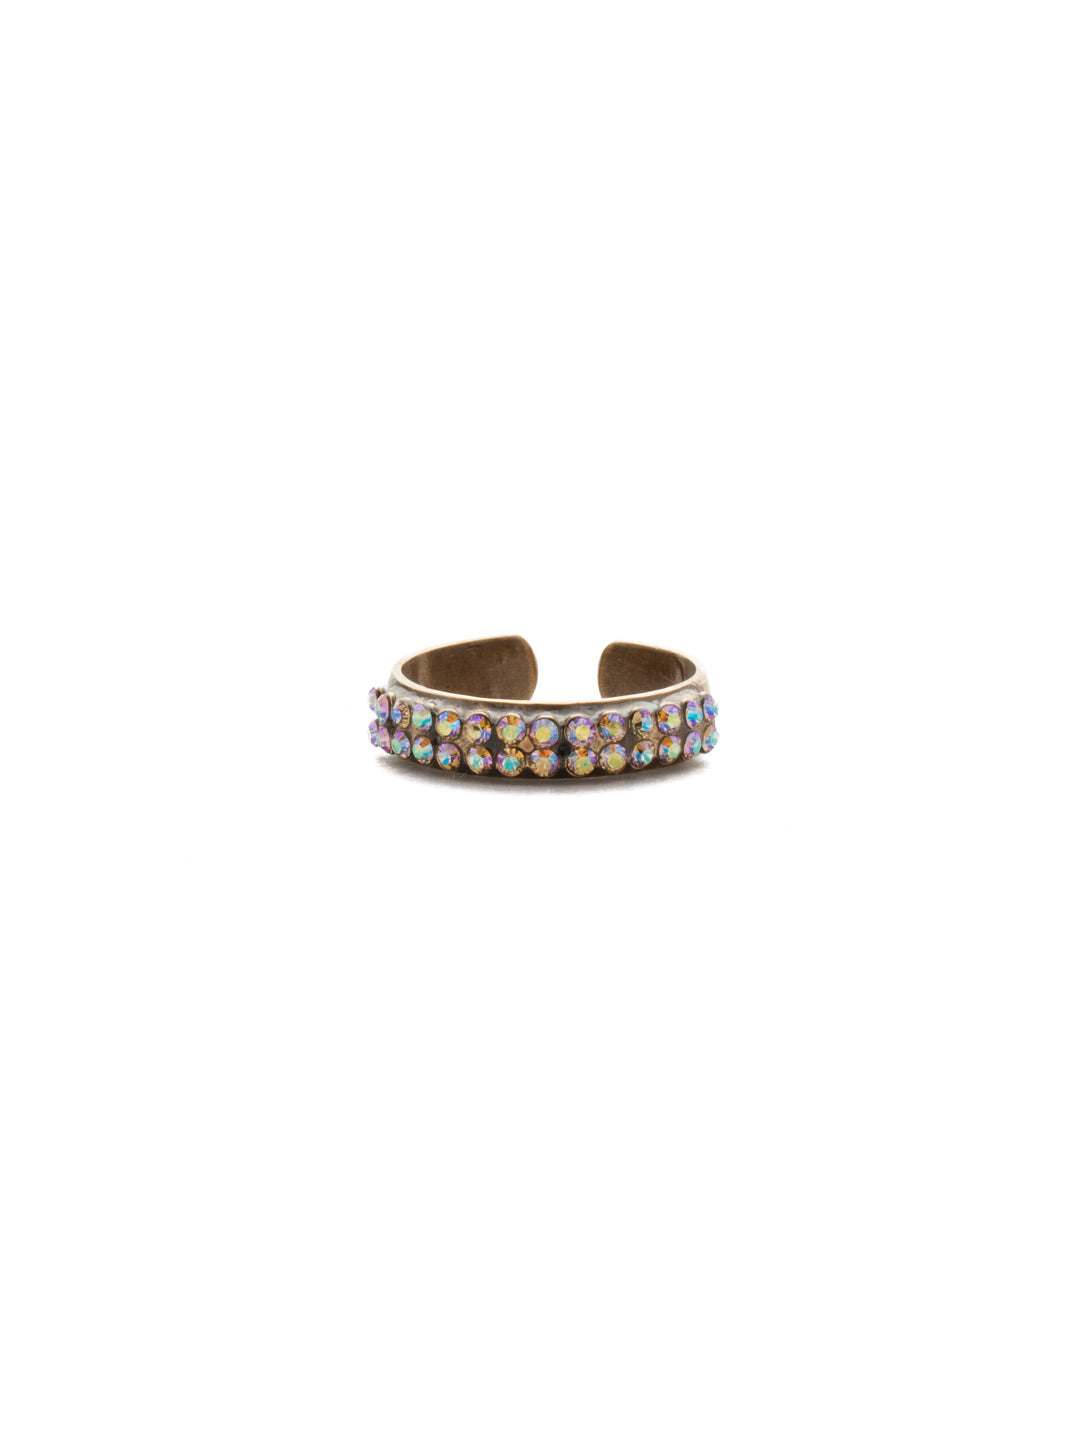 Kizzy Ring - REK14AGROB - <p>Layer on shine with this ring with two rows of shimmering crystal stones in one simple, adjustable piece. Our rings will shimmer all night long. From Sorrelli's Rocky Beach collection in our Antique Gold-tone finish.</p>